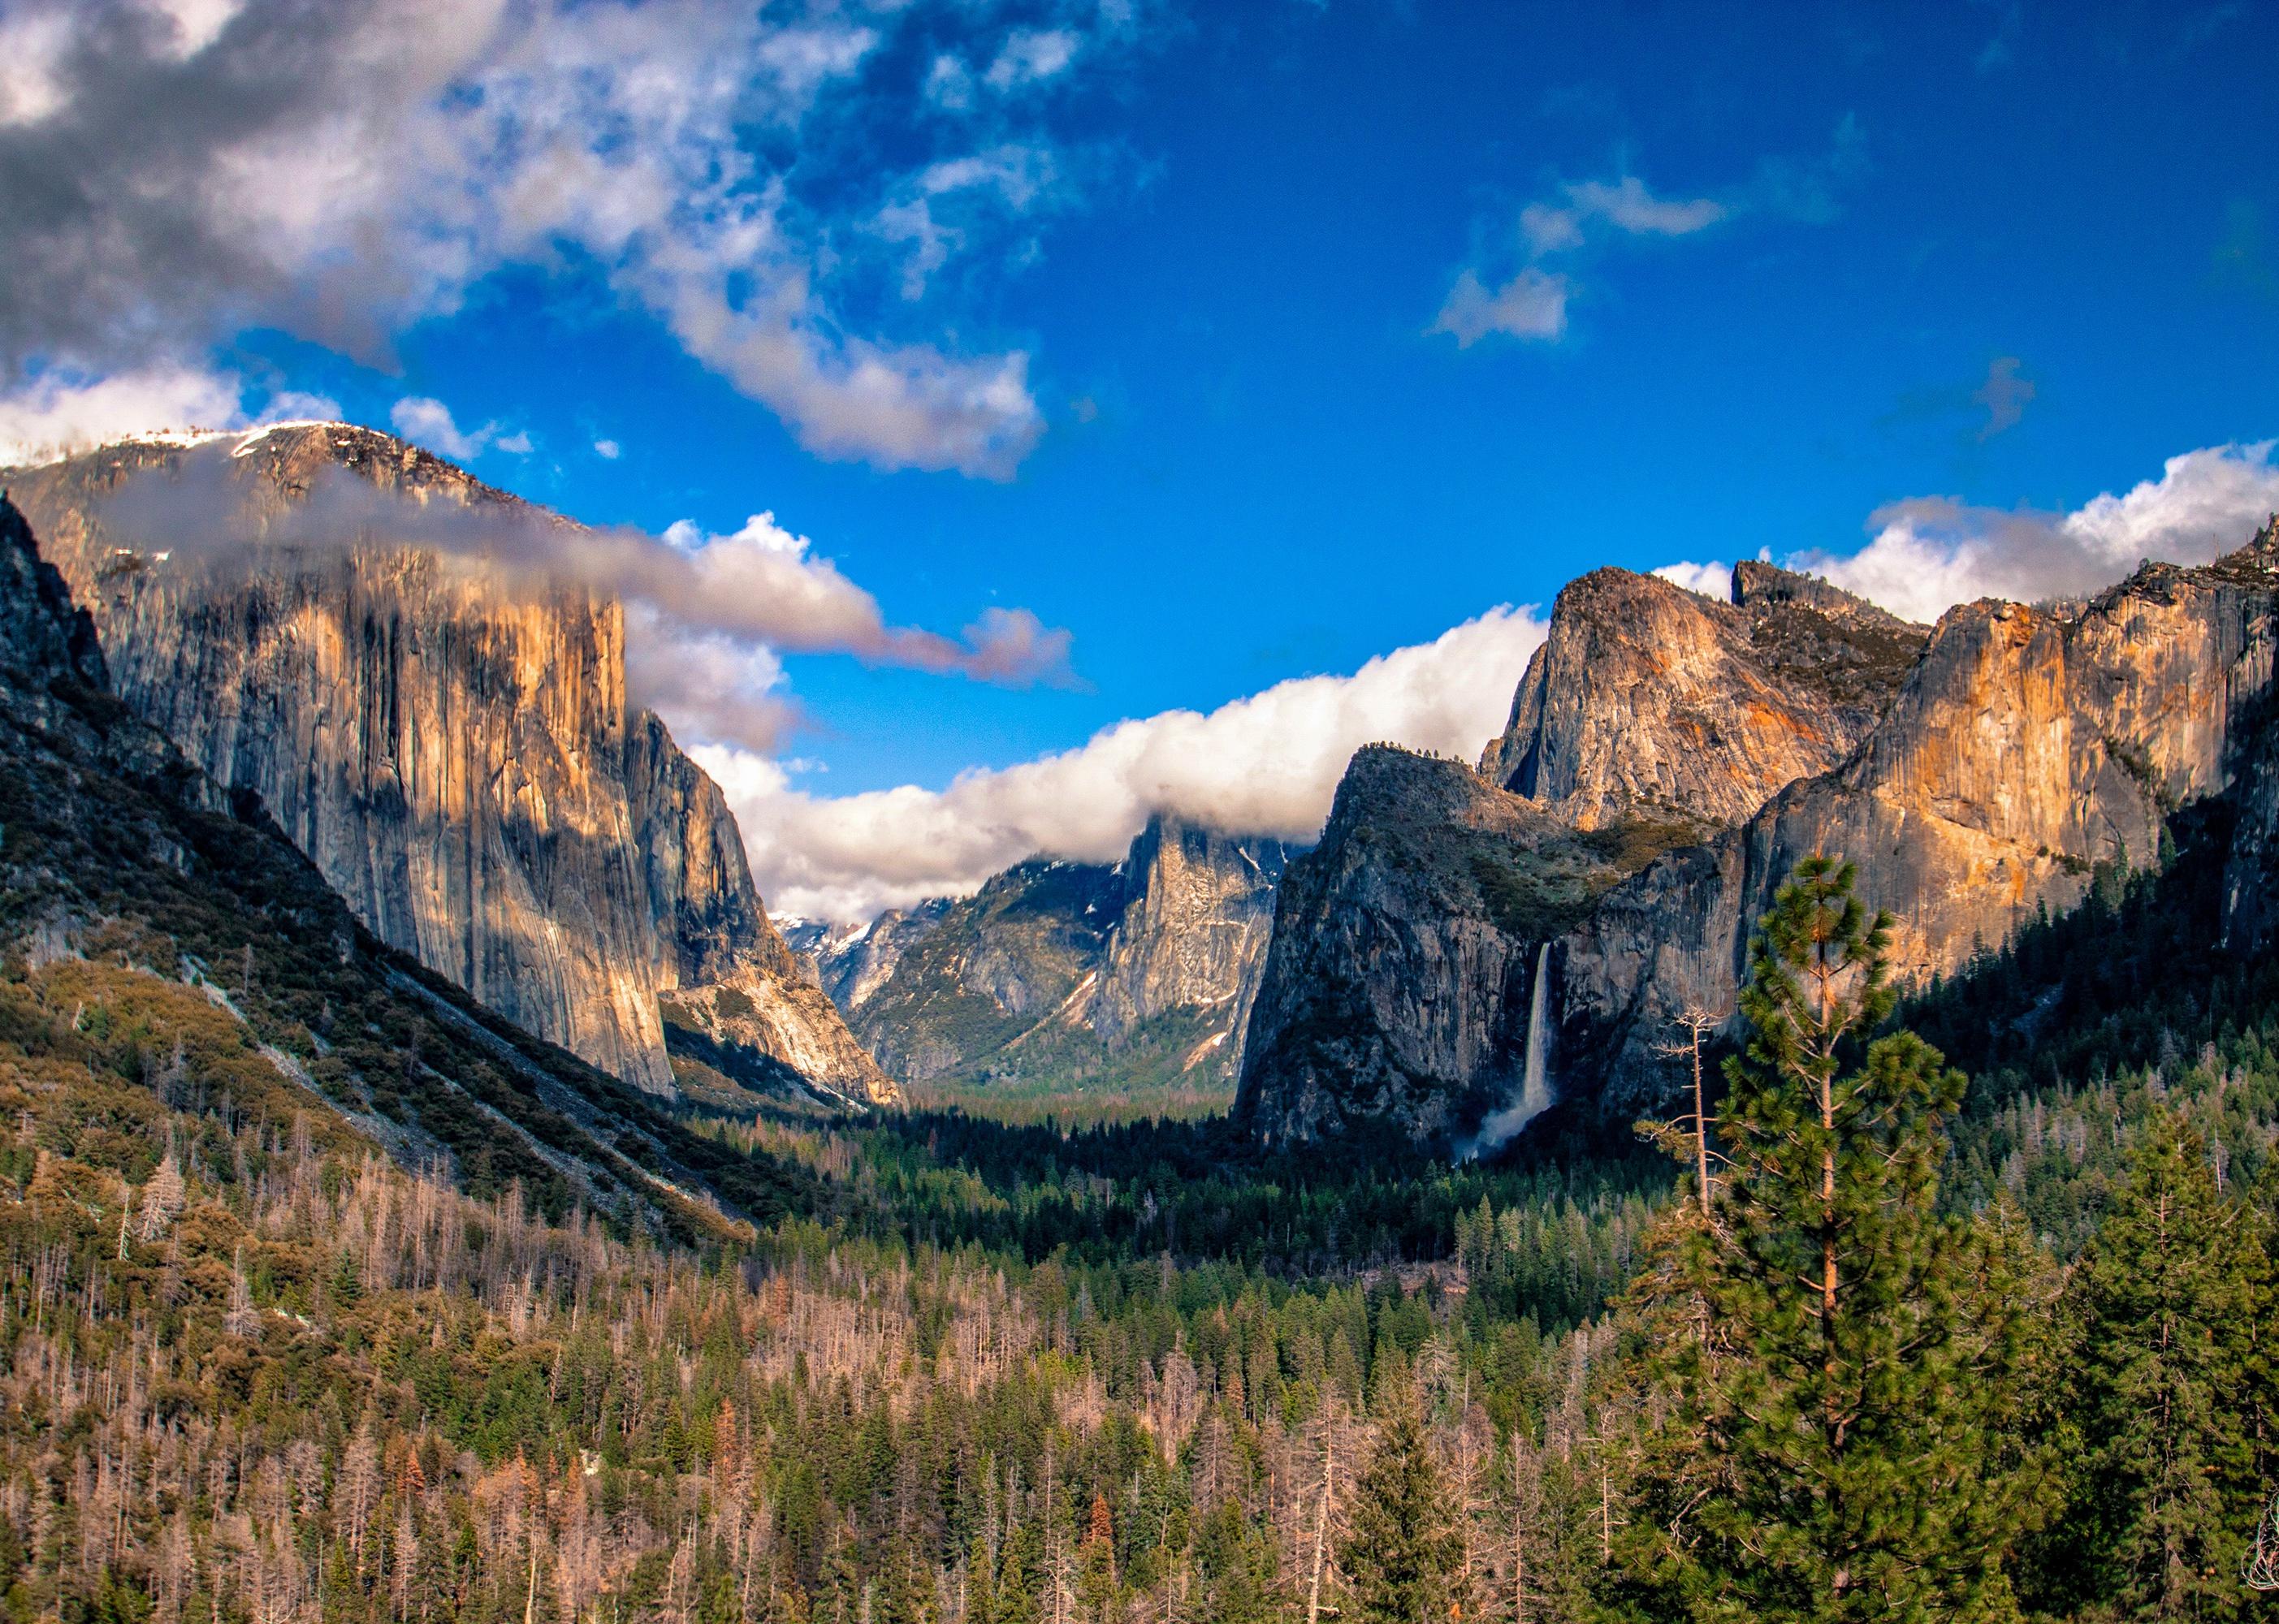 Wide view of Yosemite National Park valley.